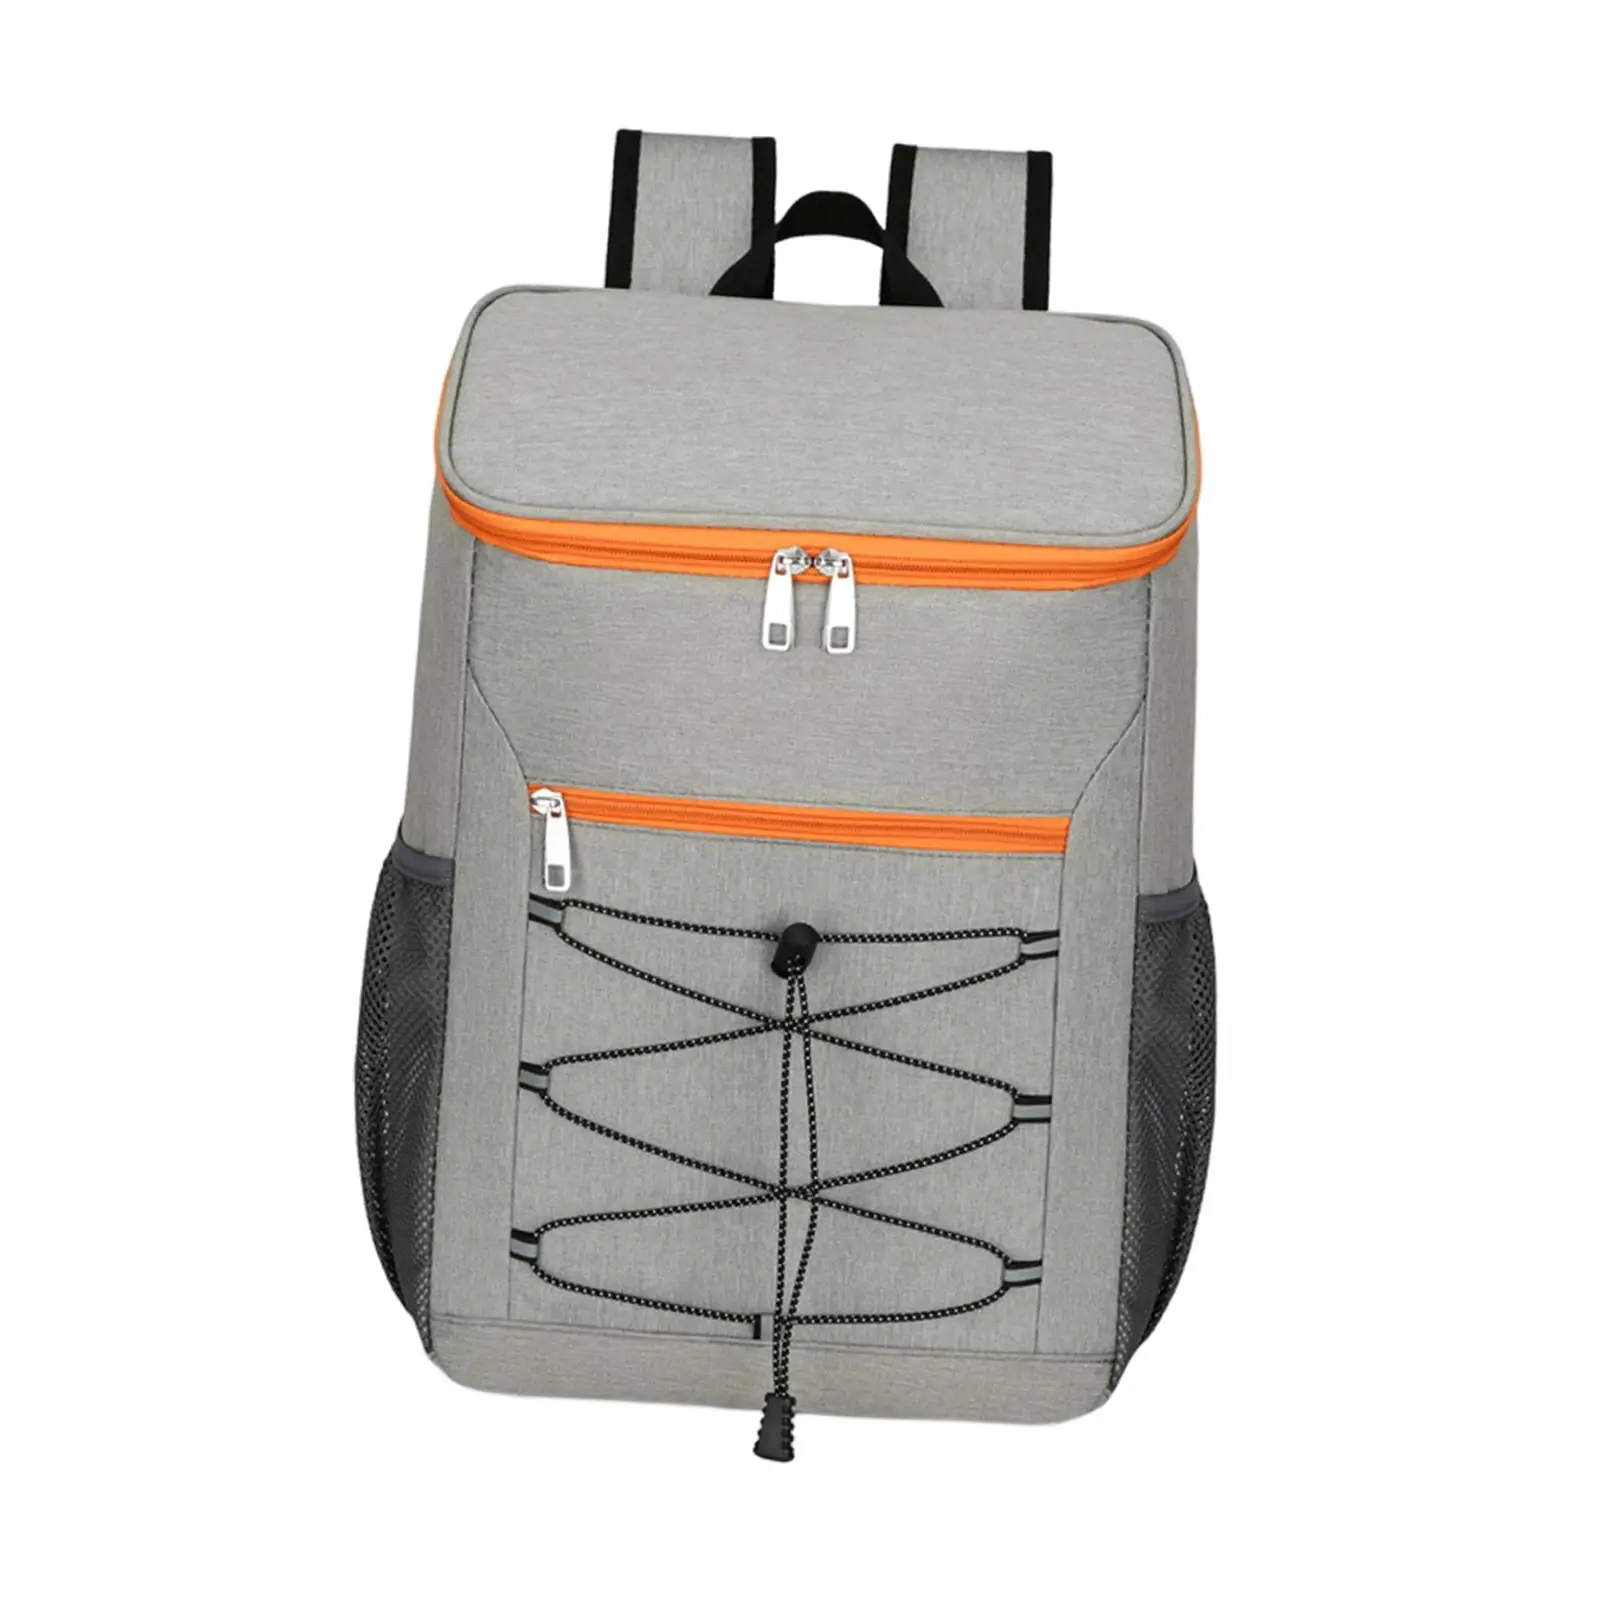 Insulated Cooler Backpack Insulated Cooler Bag Mesh Pocket Multifunctional Leakproof Lunch Backpack Beer Bag for Fishing Picnic